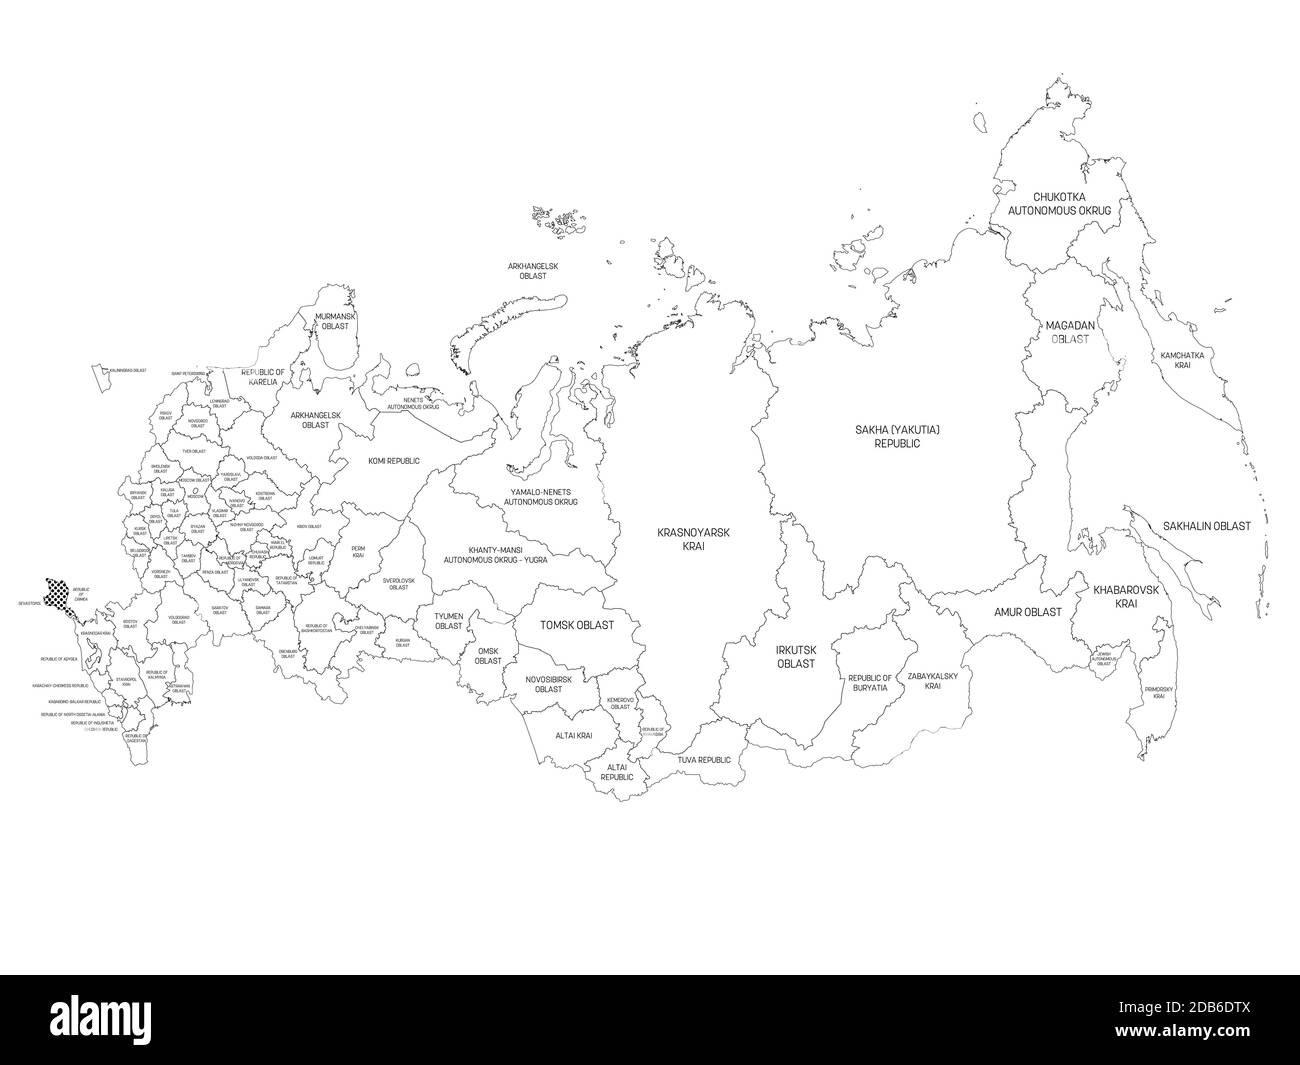 Political map of Russia, or Russian Federation. Federal subjects - republics, krays, oblasts, cities of federal significance, autonomous oblasts and autonomous okrugs. Simple black outline vector map with labels. Stock Vector